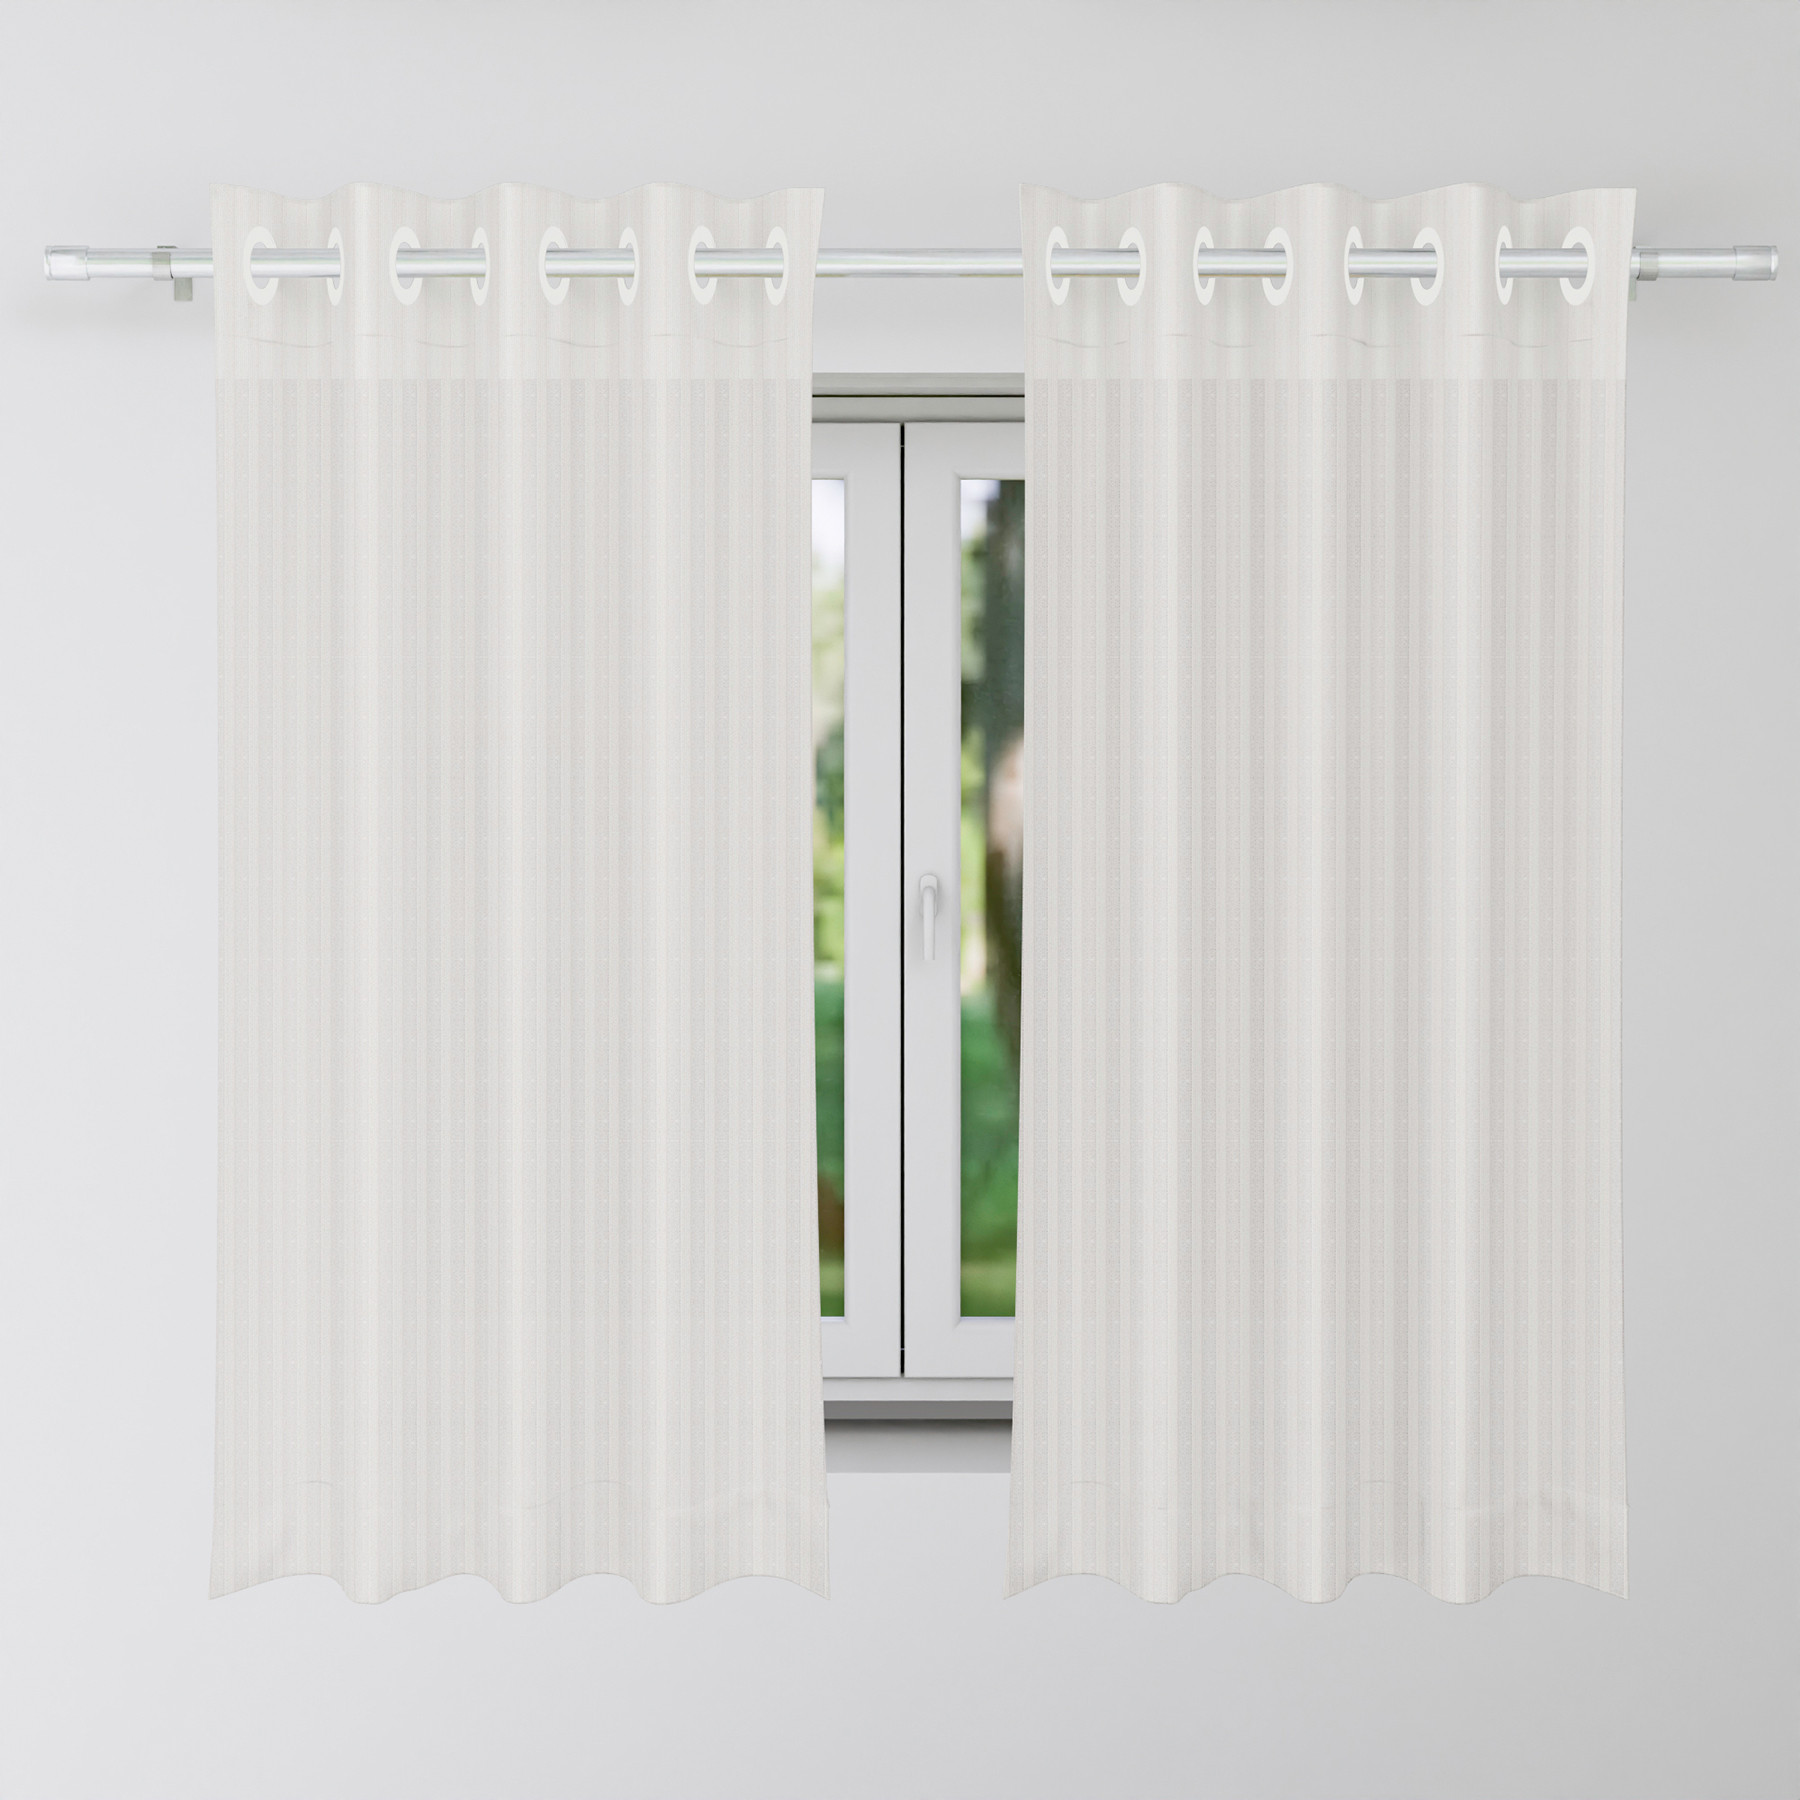 Kuber Industries Window Curtain | Sheer Window Curtains | Parda for Living Room | Drapes for Bedroom | Window Curtain Parda for Home Décor | Lining Net | 5 Feet | Cream